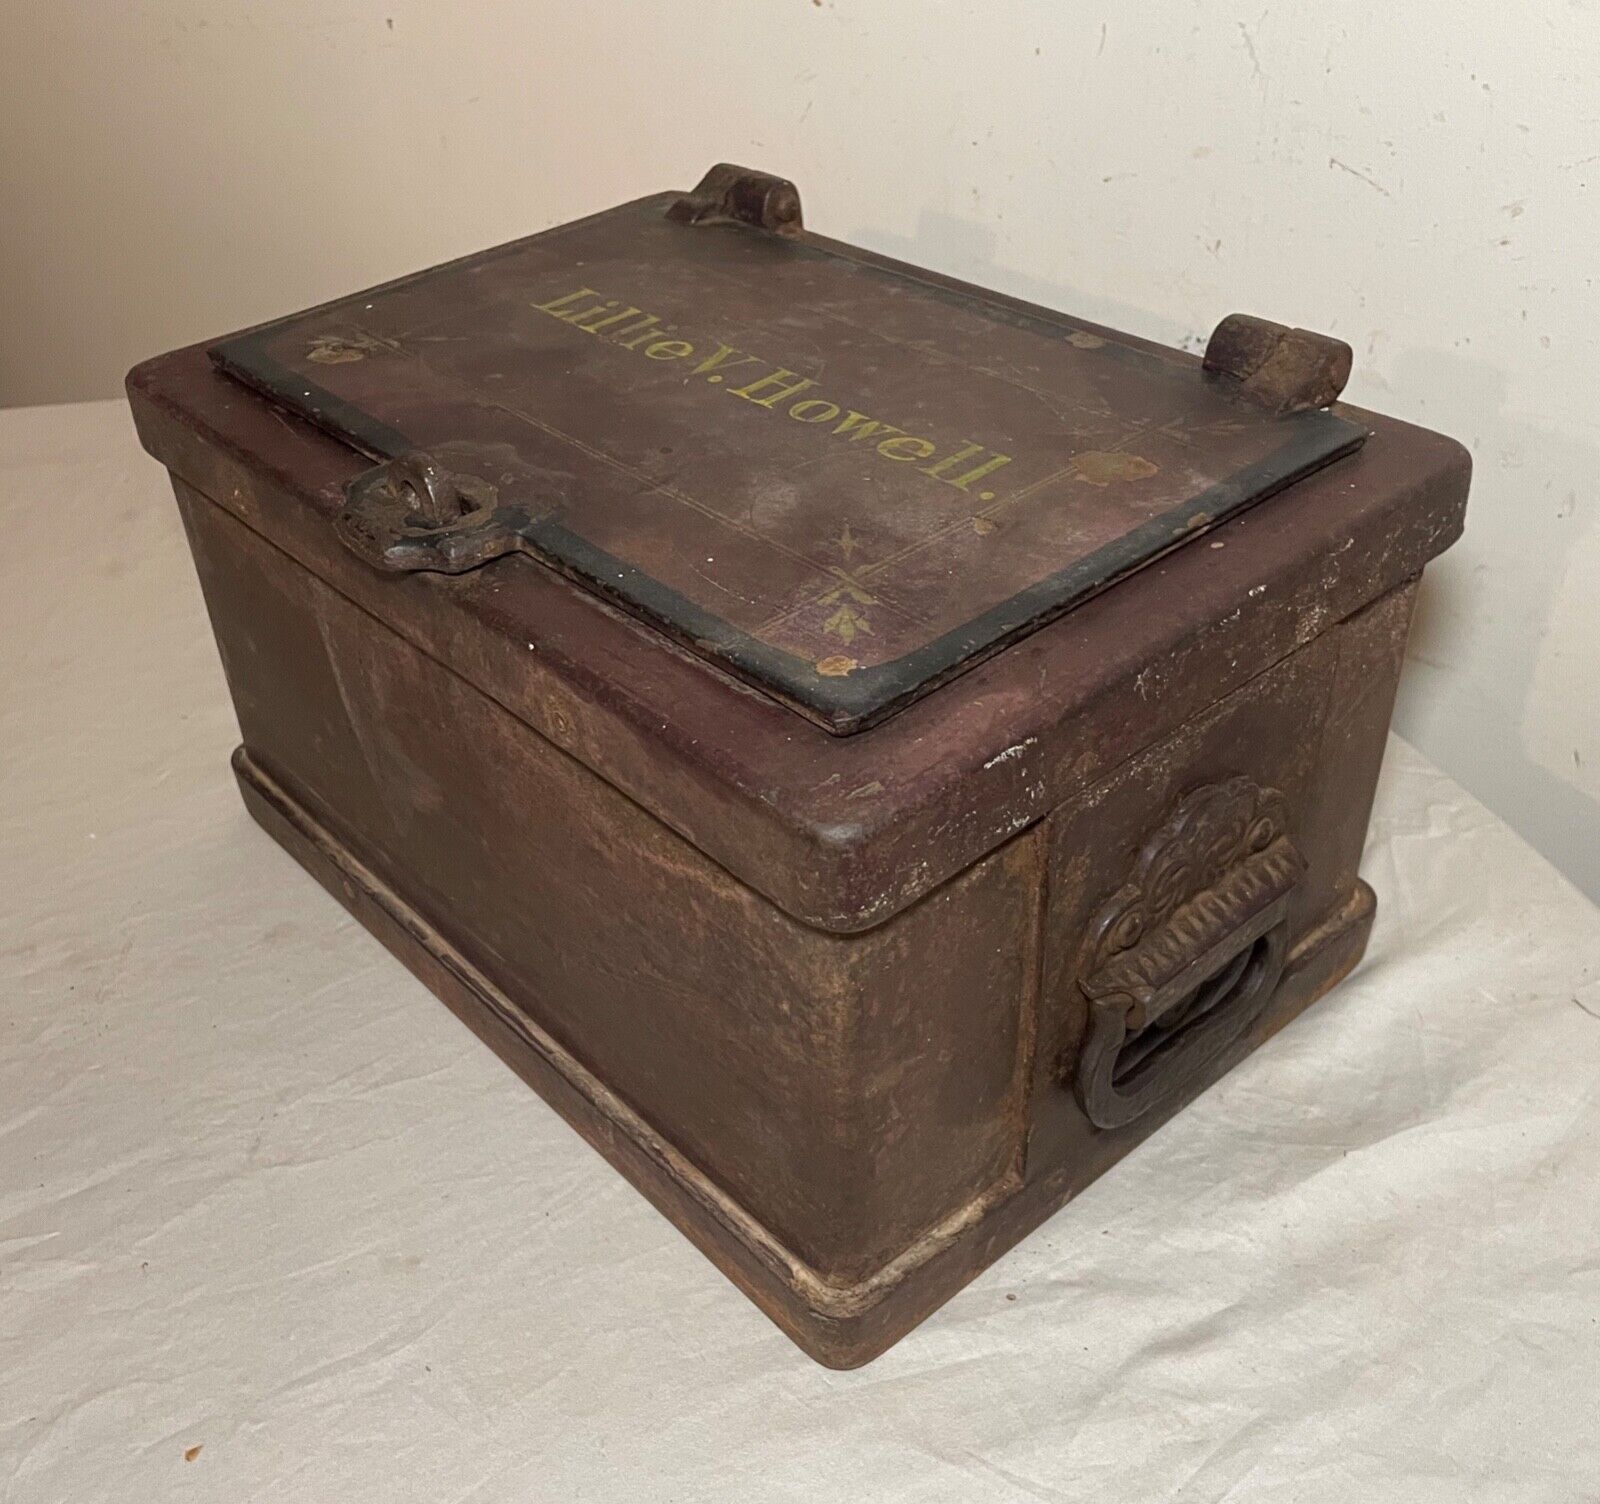 rare antique hand painted heavy 50 lbs. Eastlake cast iron strong box money safe